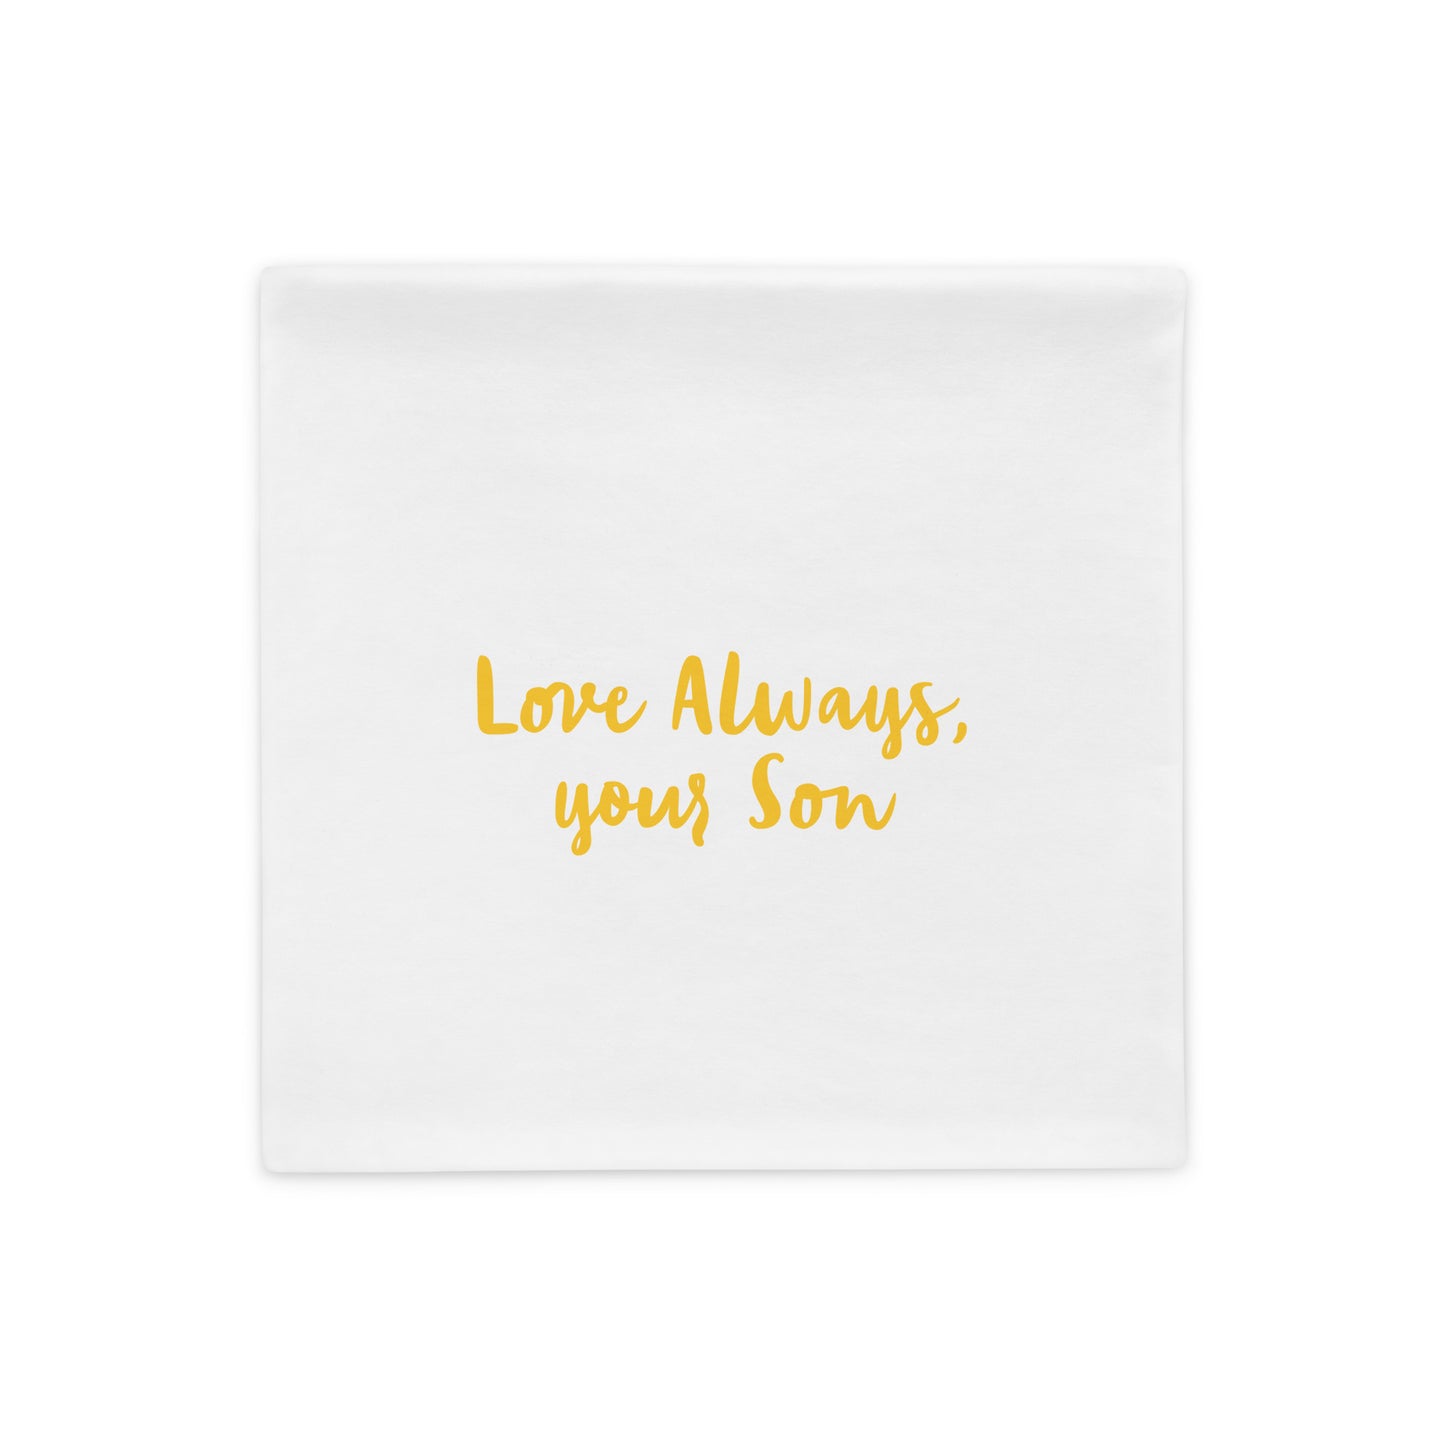 Missing you Cuddles Pillow Case